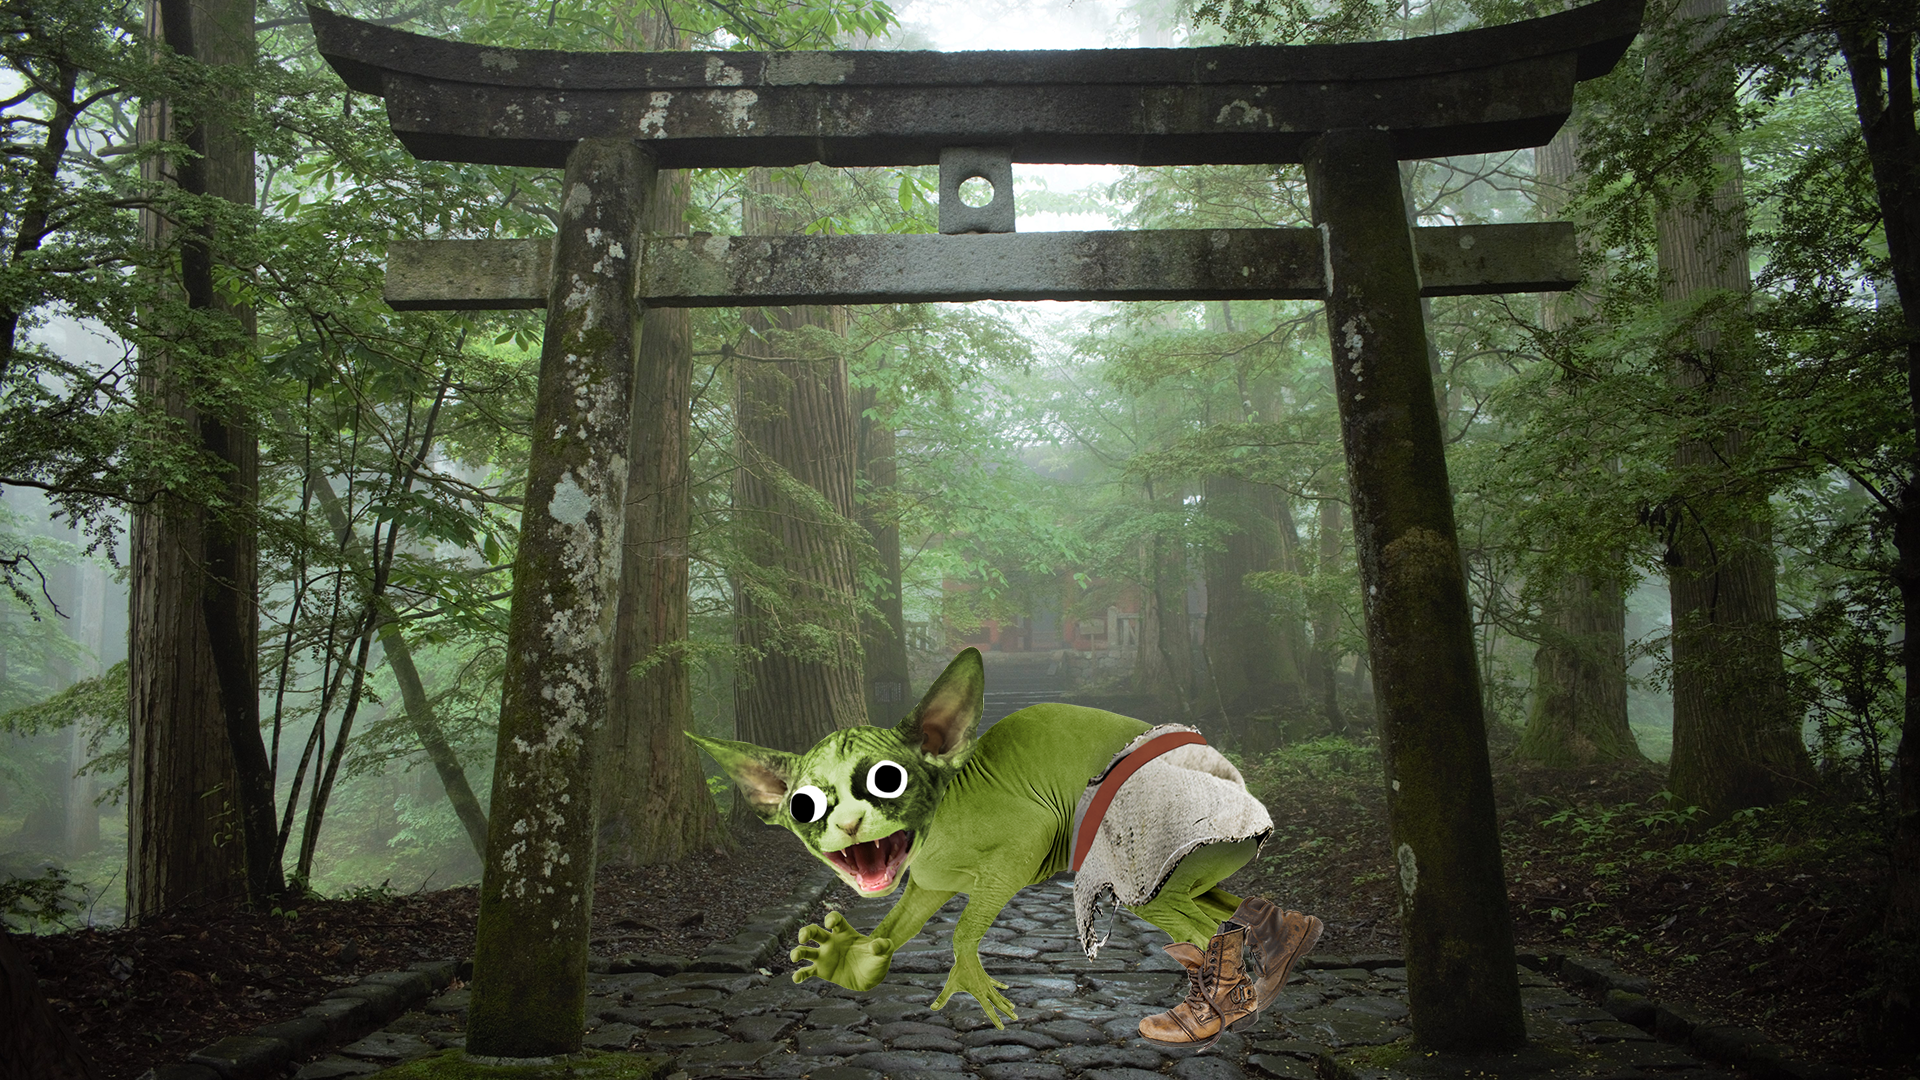 A goblin in a spooky forest